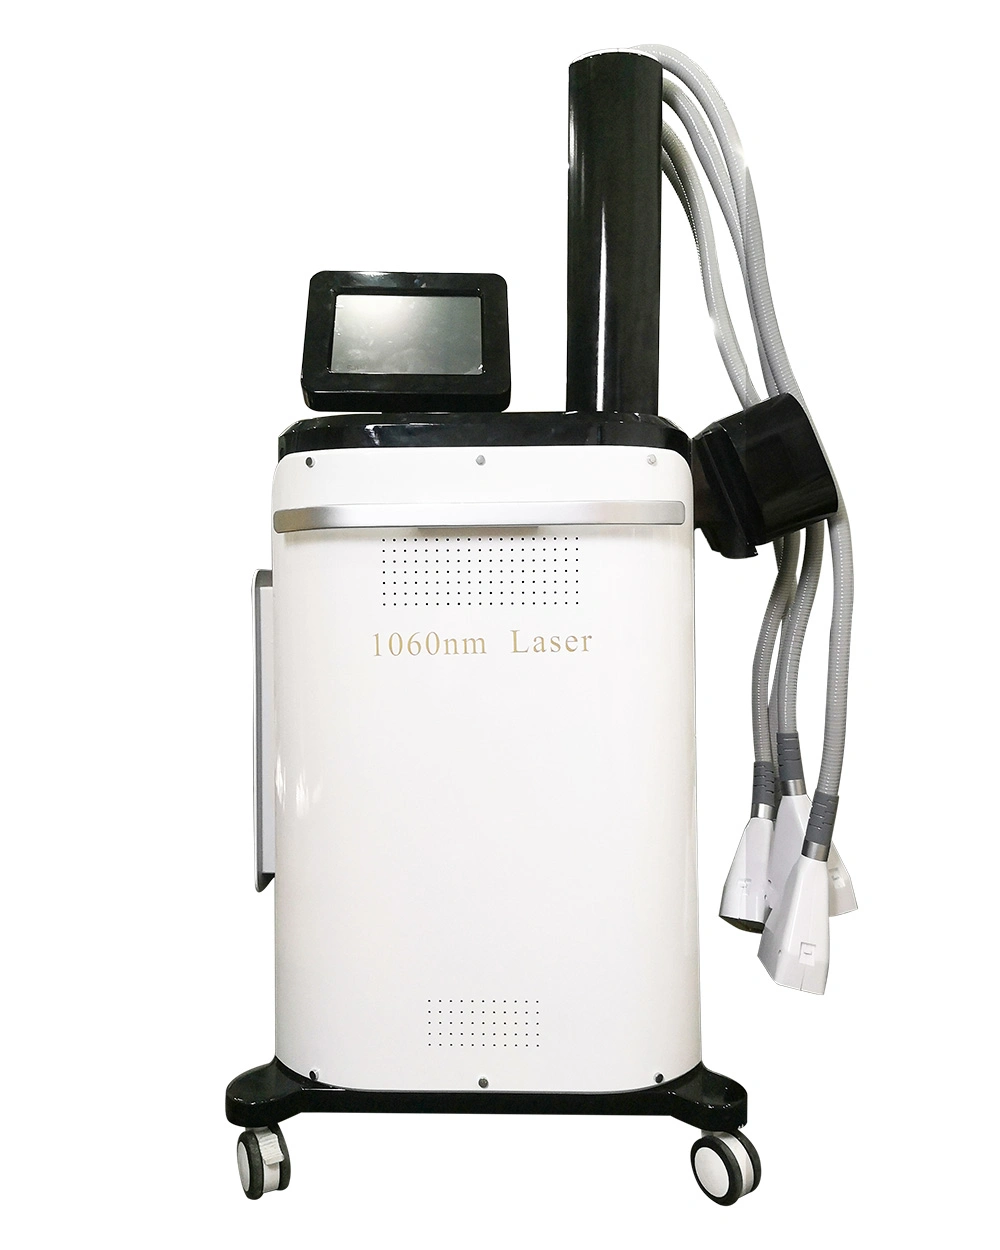 Newly Designed Fat Removal Beauty Equipment 1060nm Diode Laser, Beauty Machine for Beauty Salon